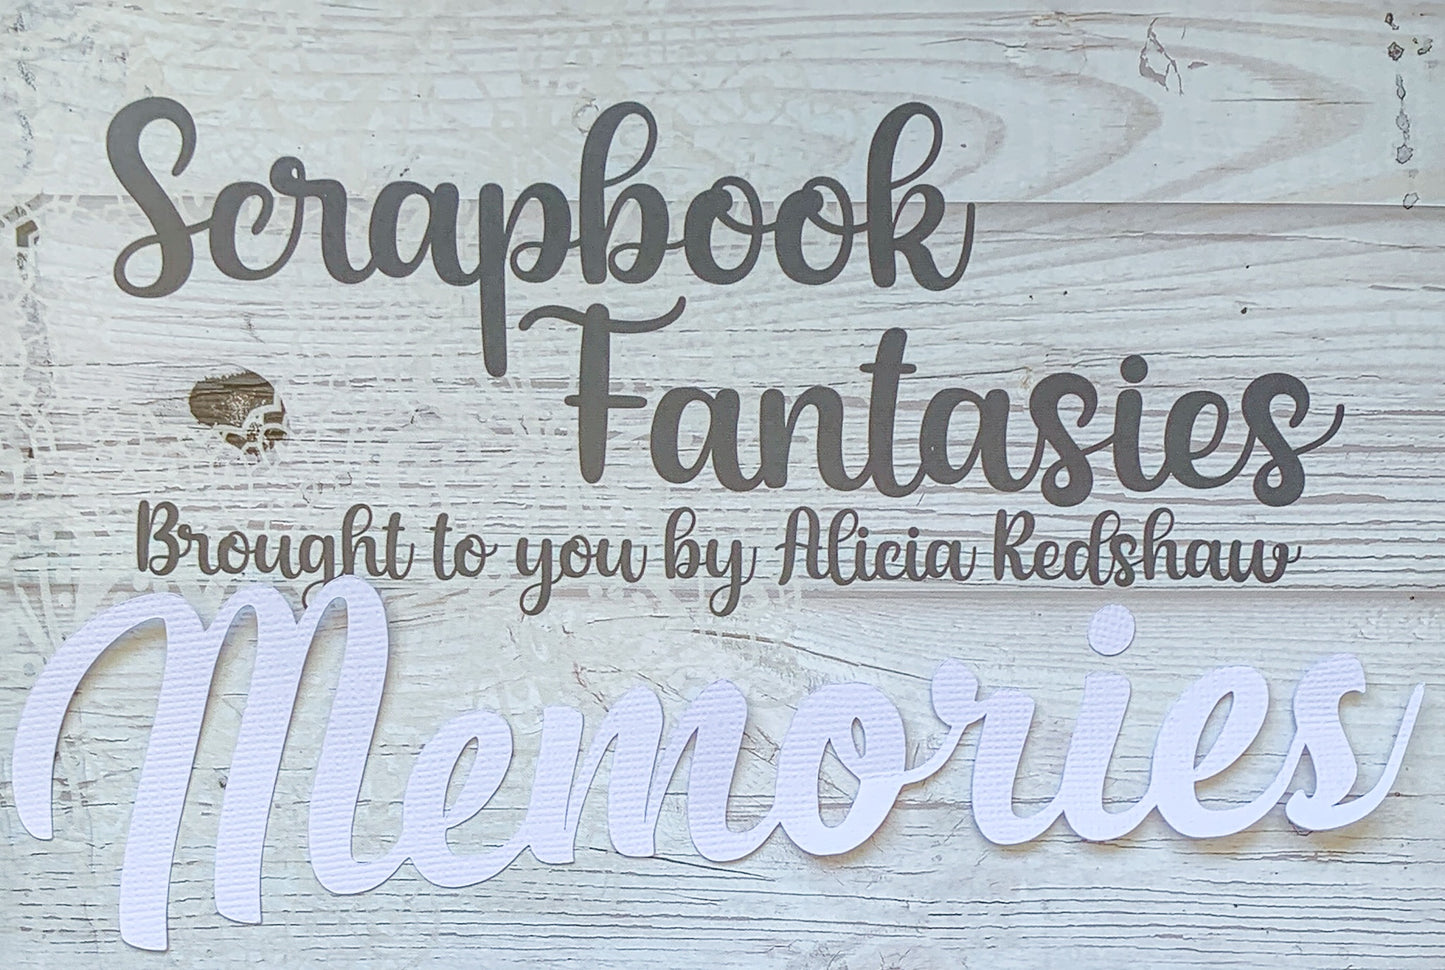 Memories 8"x2" White Linen Cardstock Title-Cut - Designed by Alicia Redshaw